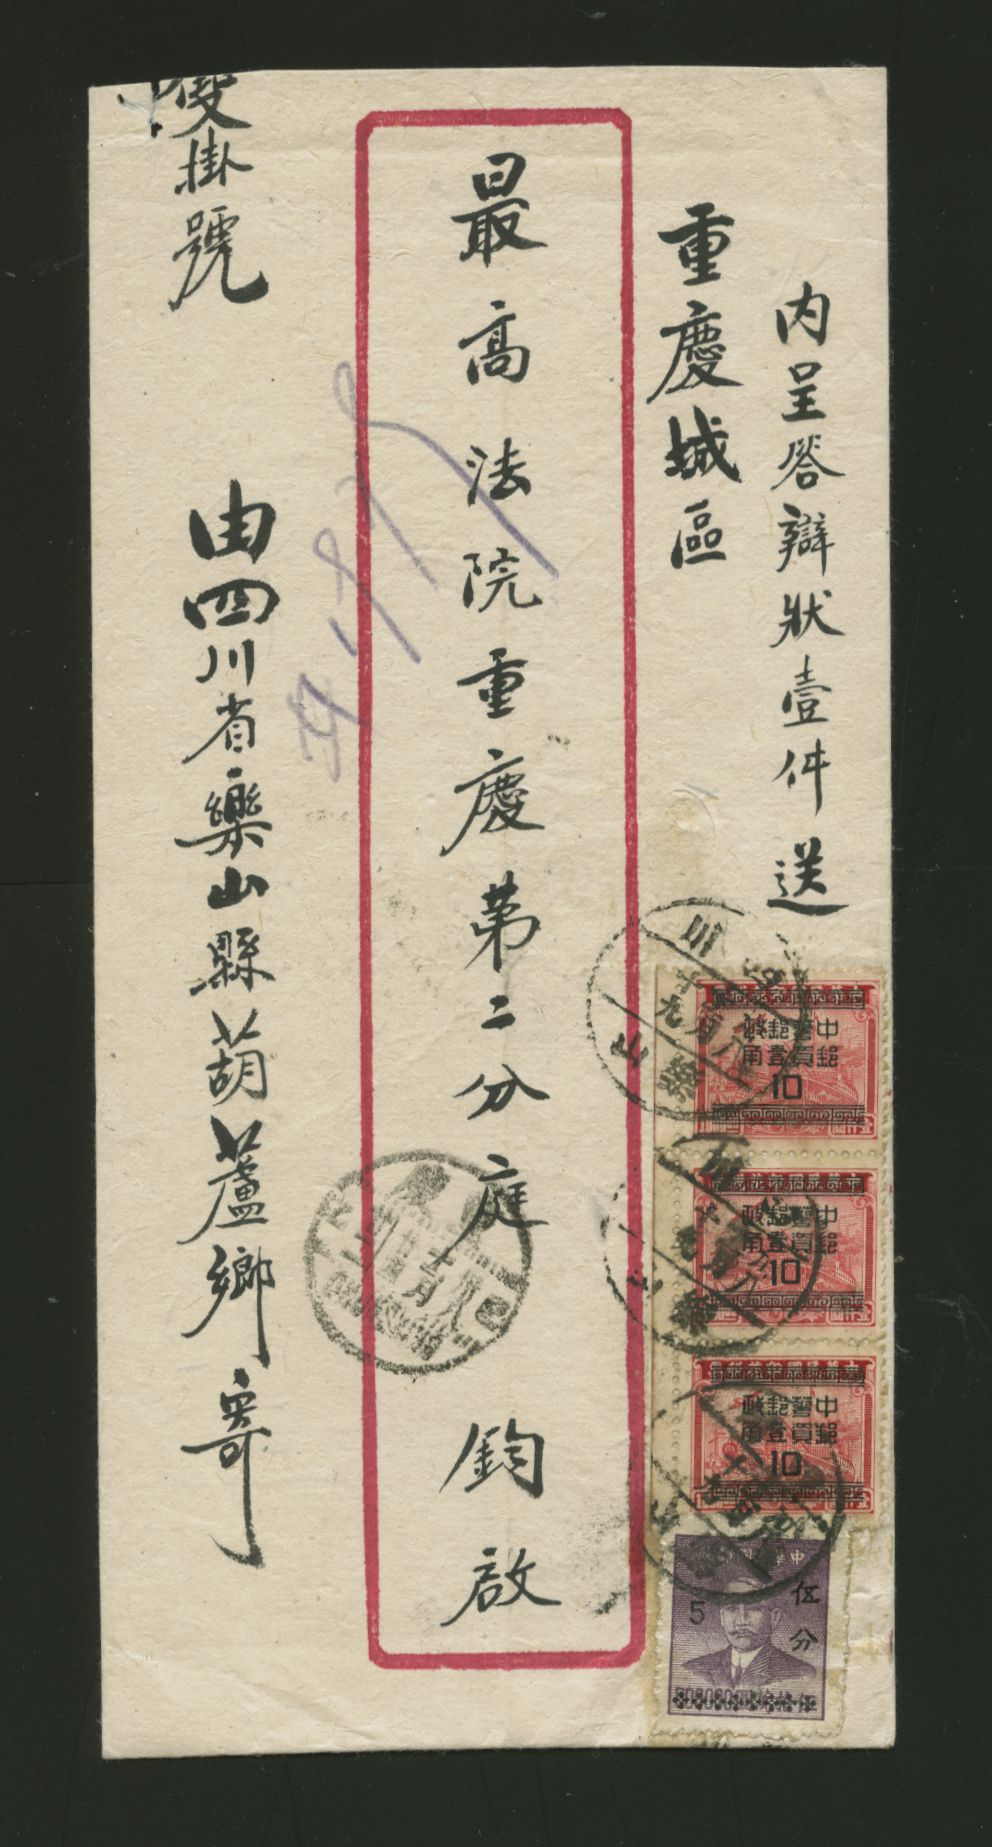 1949 Nov. 19 Loshan 35c to Shapingpa (rec'd. Nov. 25) via Chungking Nov. 24 (all in E. Szechwan) addressed to the 2nd Branch Office of the Supreme Court which is presumably in Shapingpa in the Chungking City District (just to the west of the city) (2 images)